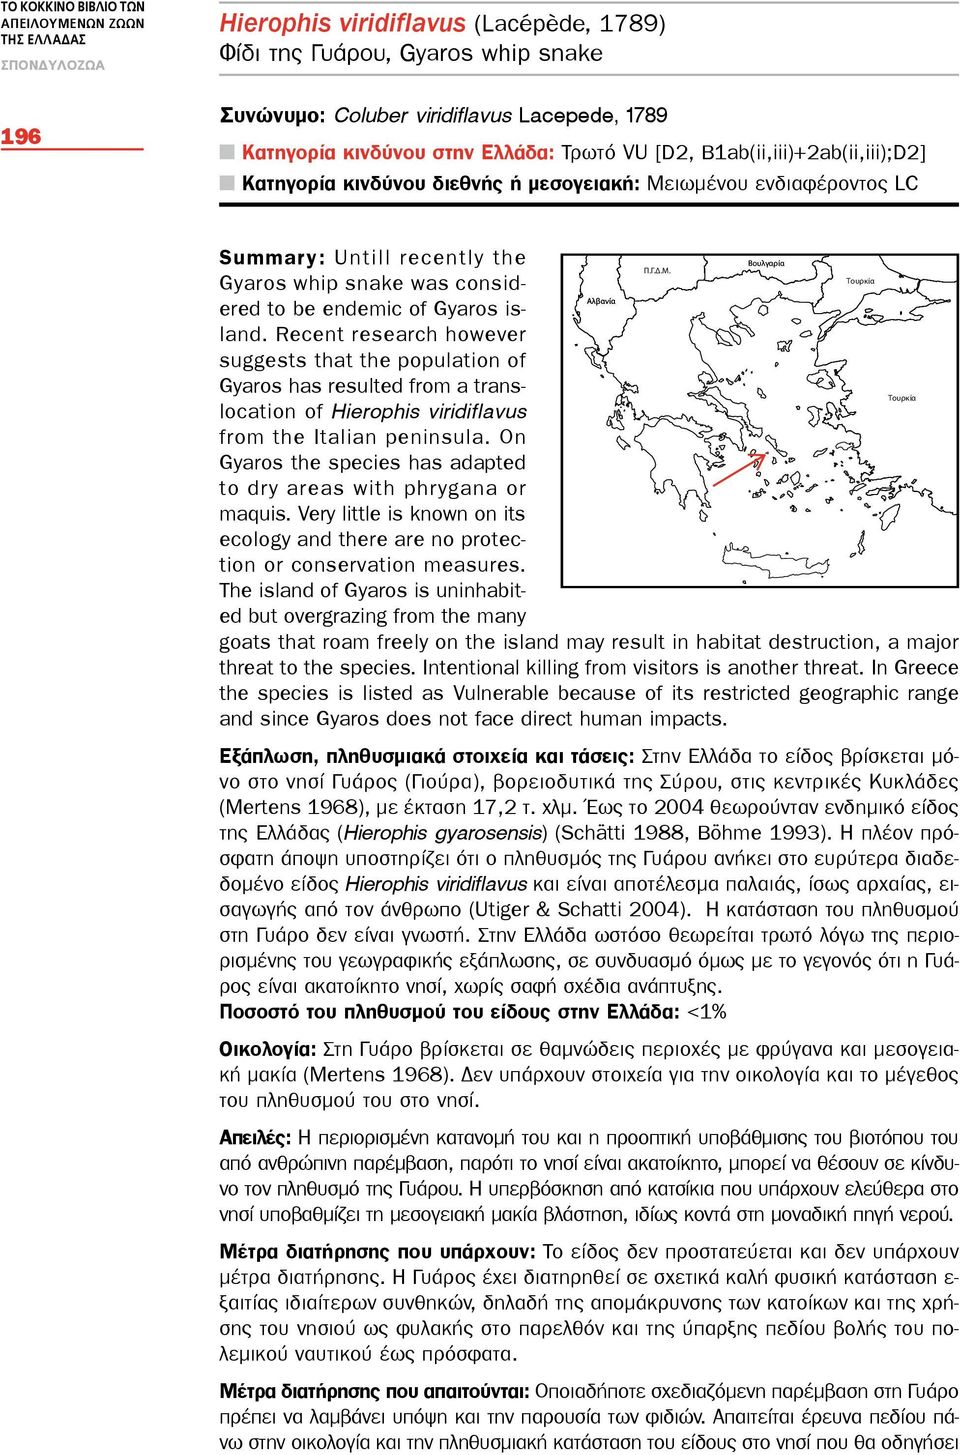 Recent research however suggests that the population of Gyaros has resulted from a translocation of Hierophis viridiflavus from the Italian peninsula.